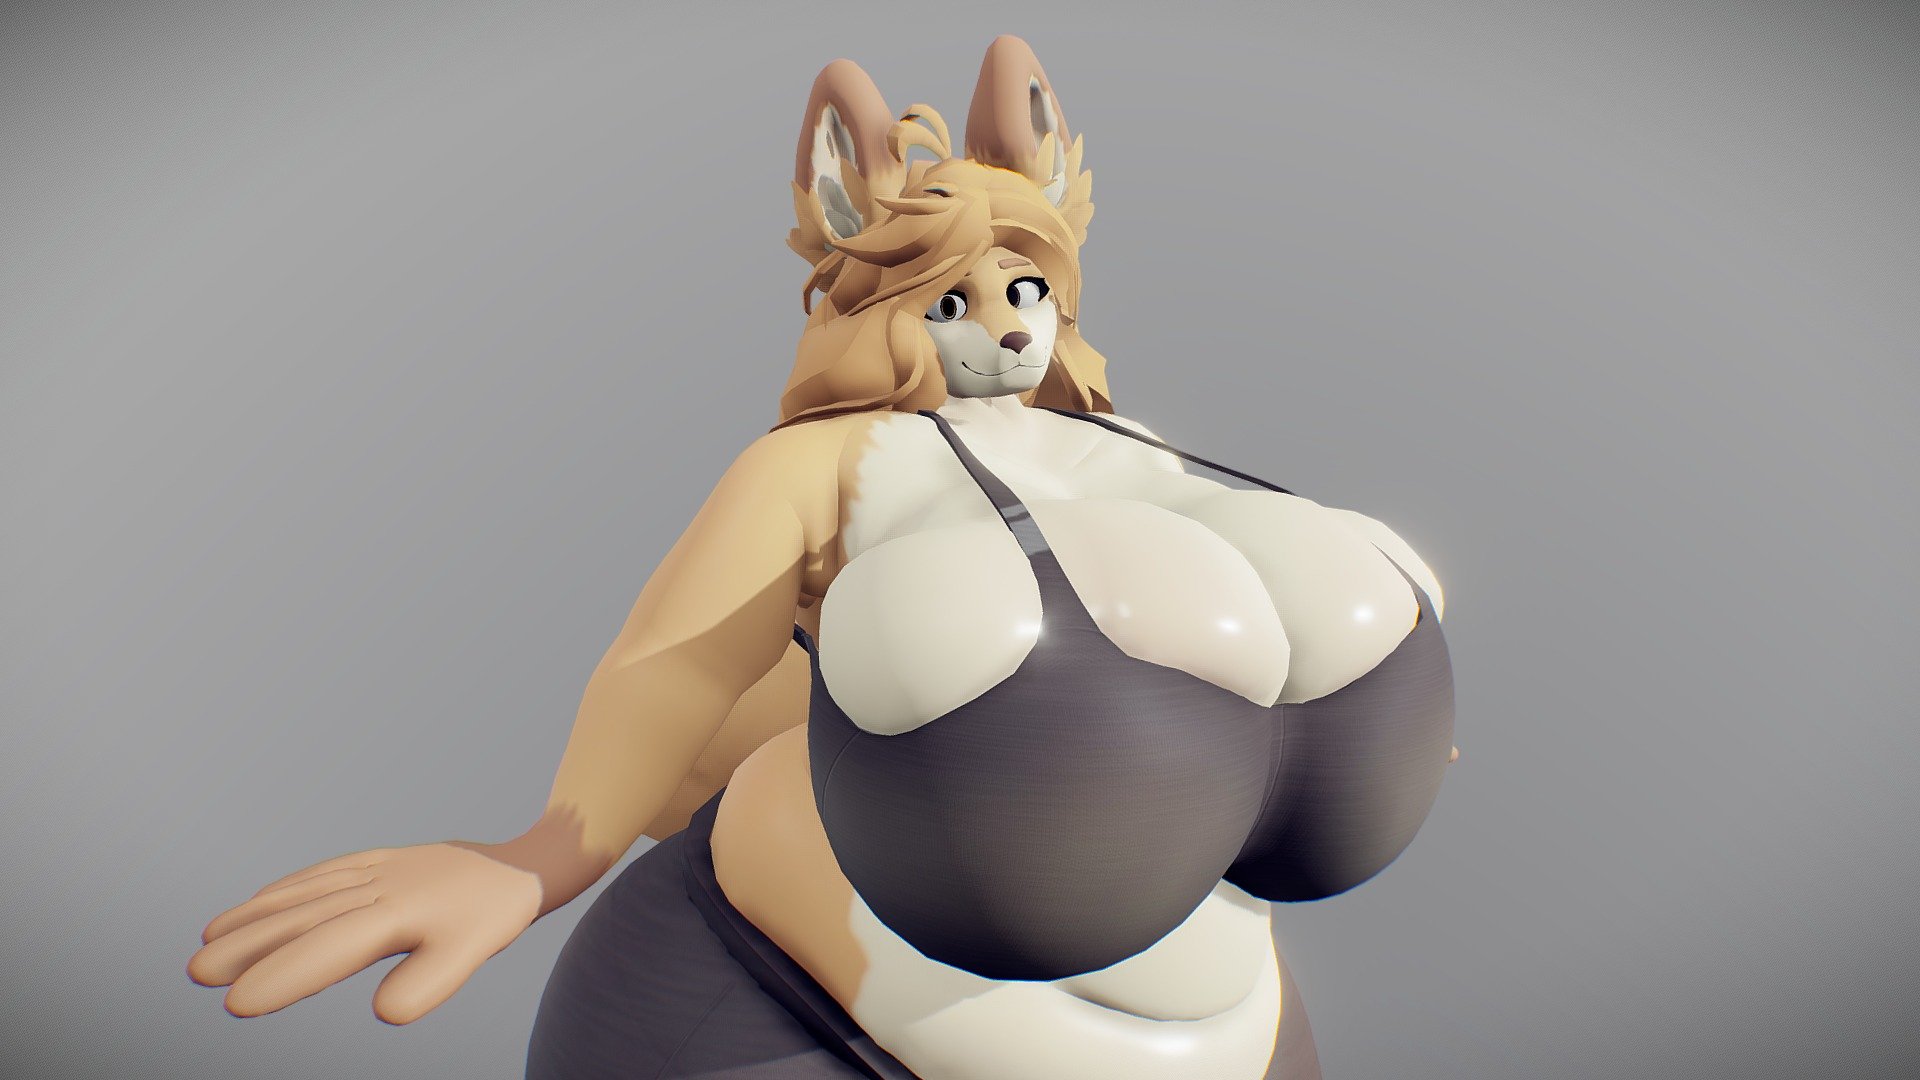 ooga booga big dog woaman!!!1!!!!11!!1!!1!!!!!!!1!!

just a quick lil model for a friend that totally didn't take me 60ish hours to make ;_; - Fox Thingy - 3D model by Stafywaffy 3d model